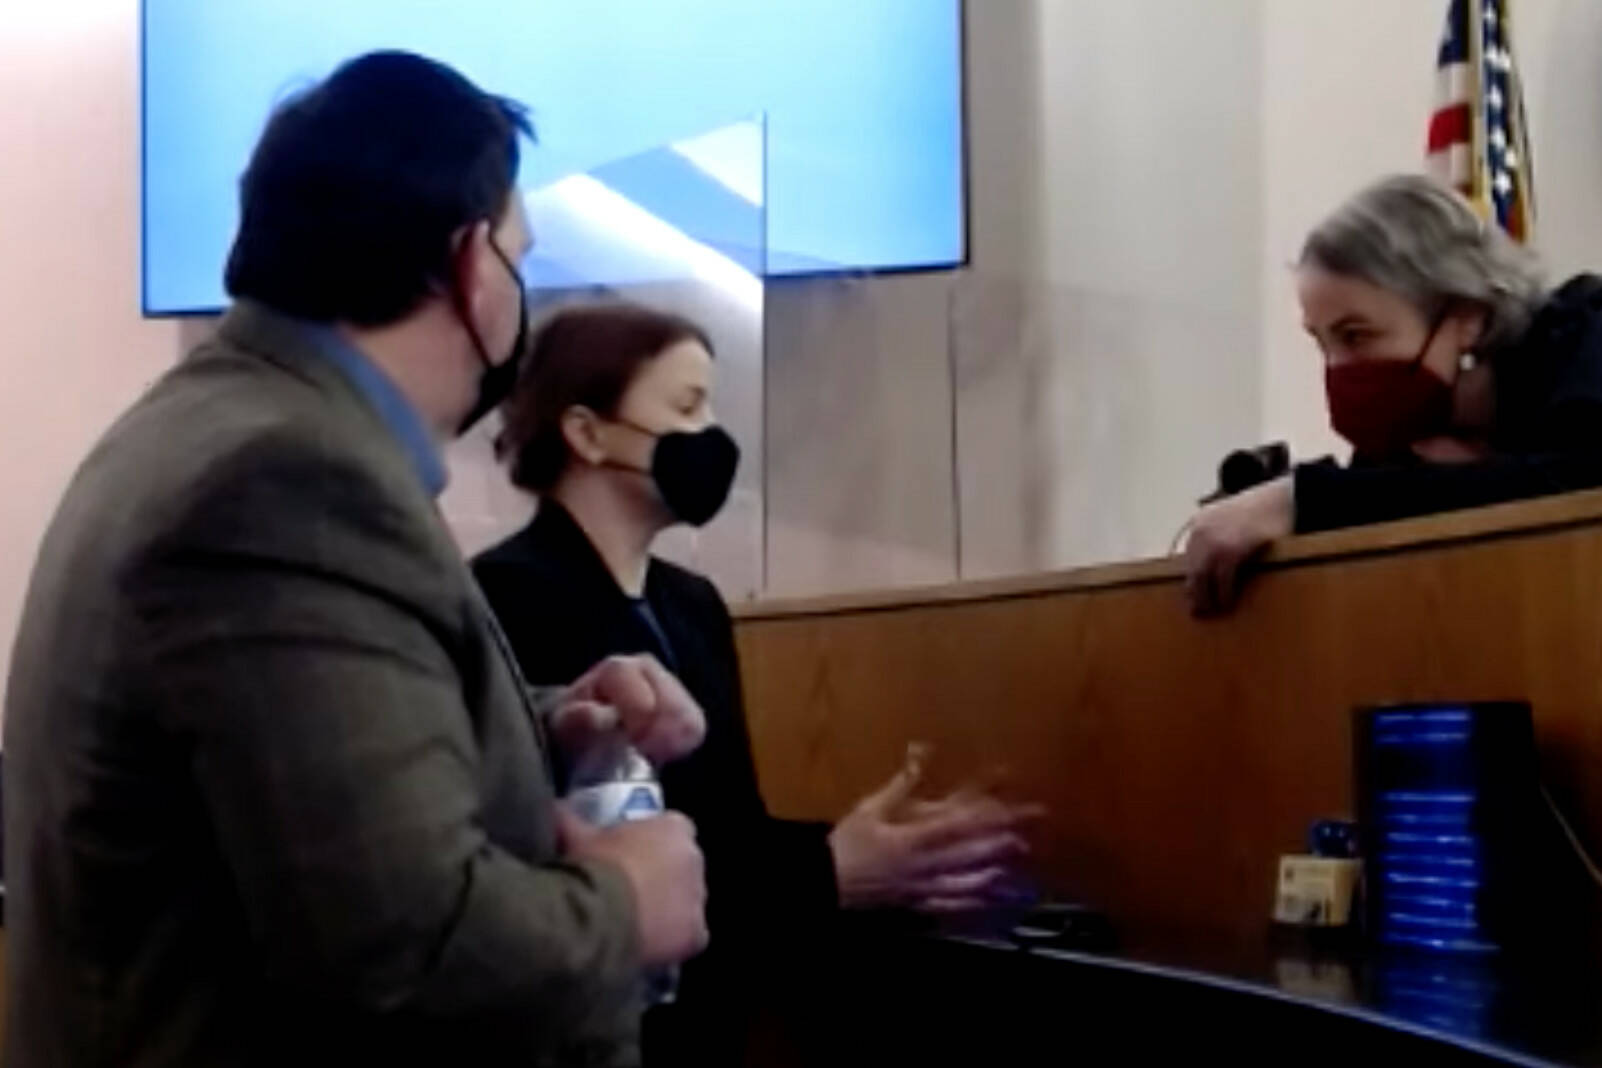 Public defender Eric Hedland, left, and District Attorney Angie Kemp consult with Superior Court Judge Amy Mead on Jan. 24, 2022 during a trial of a man accused of killing another man in Yakutat in 2018. (Screenshot)